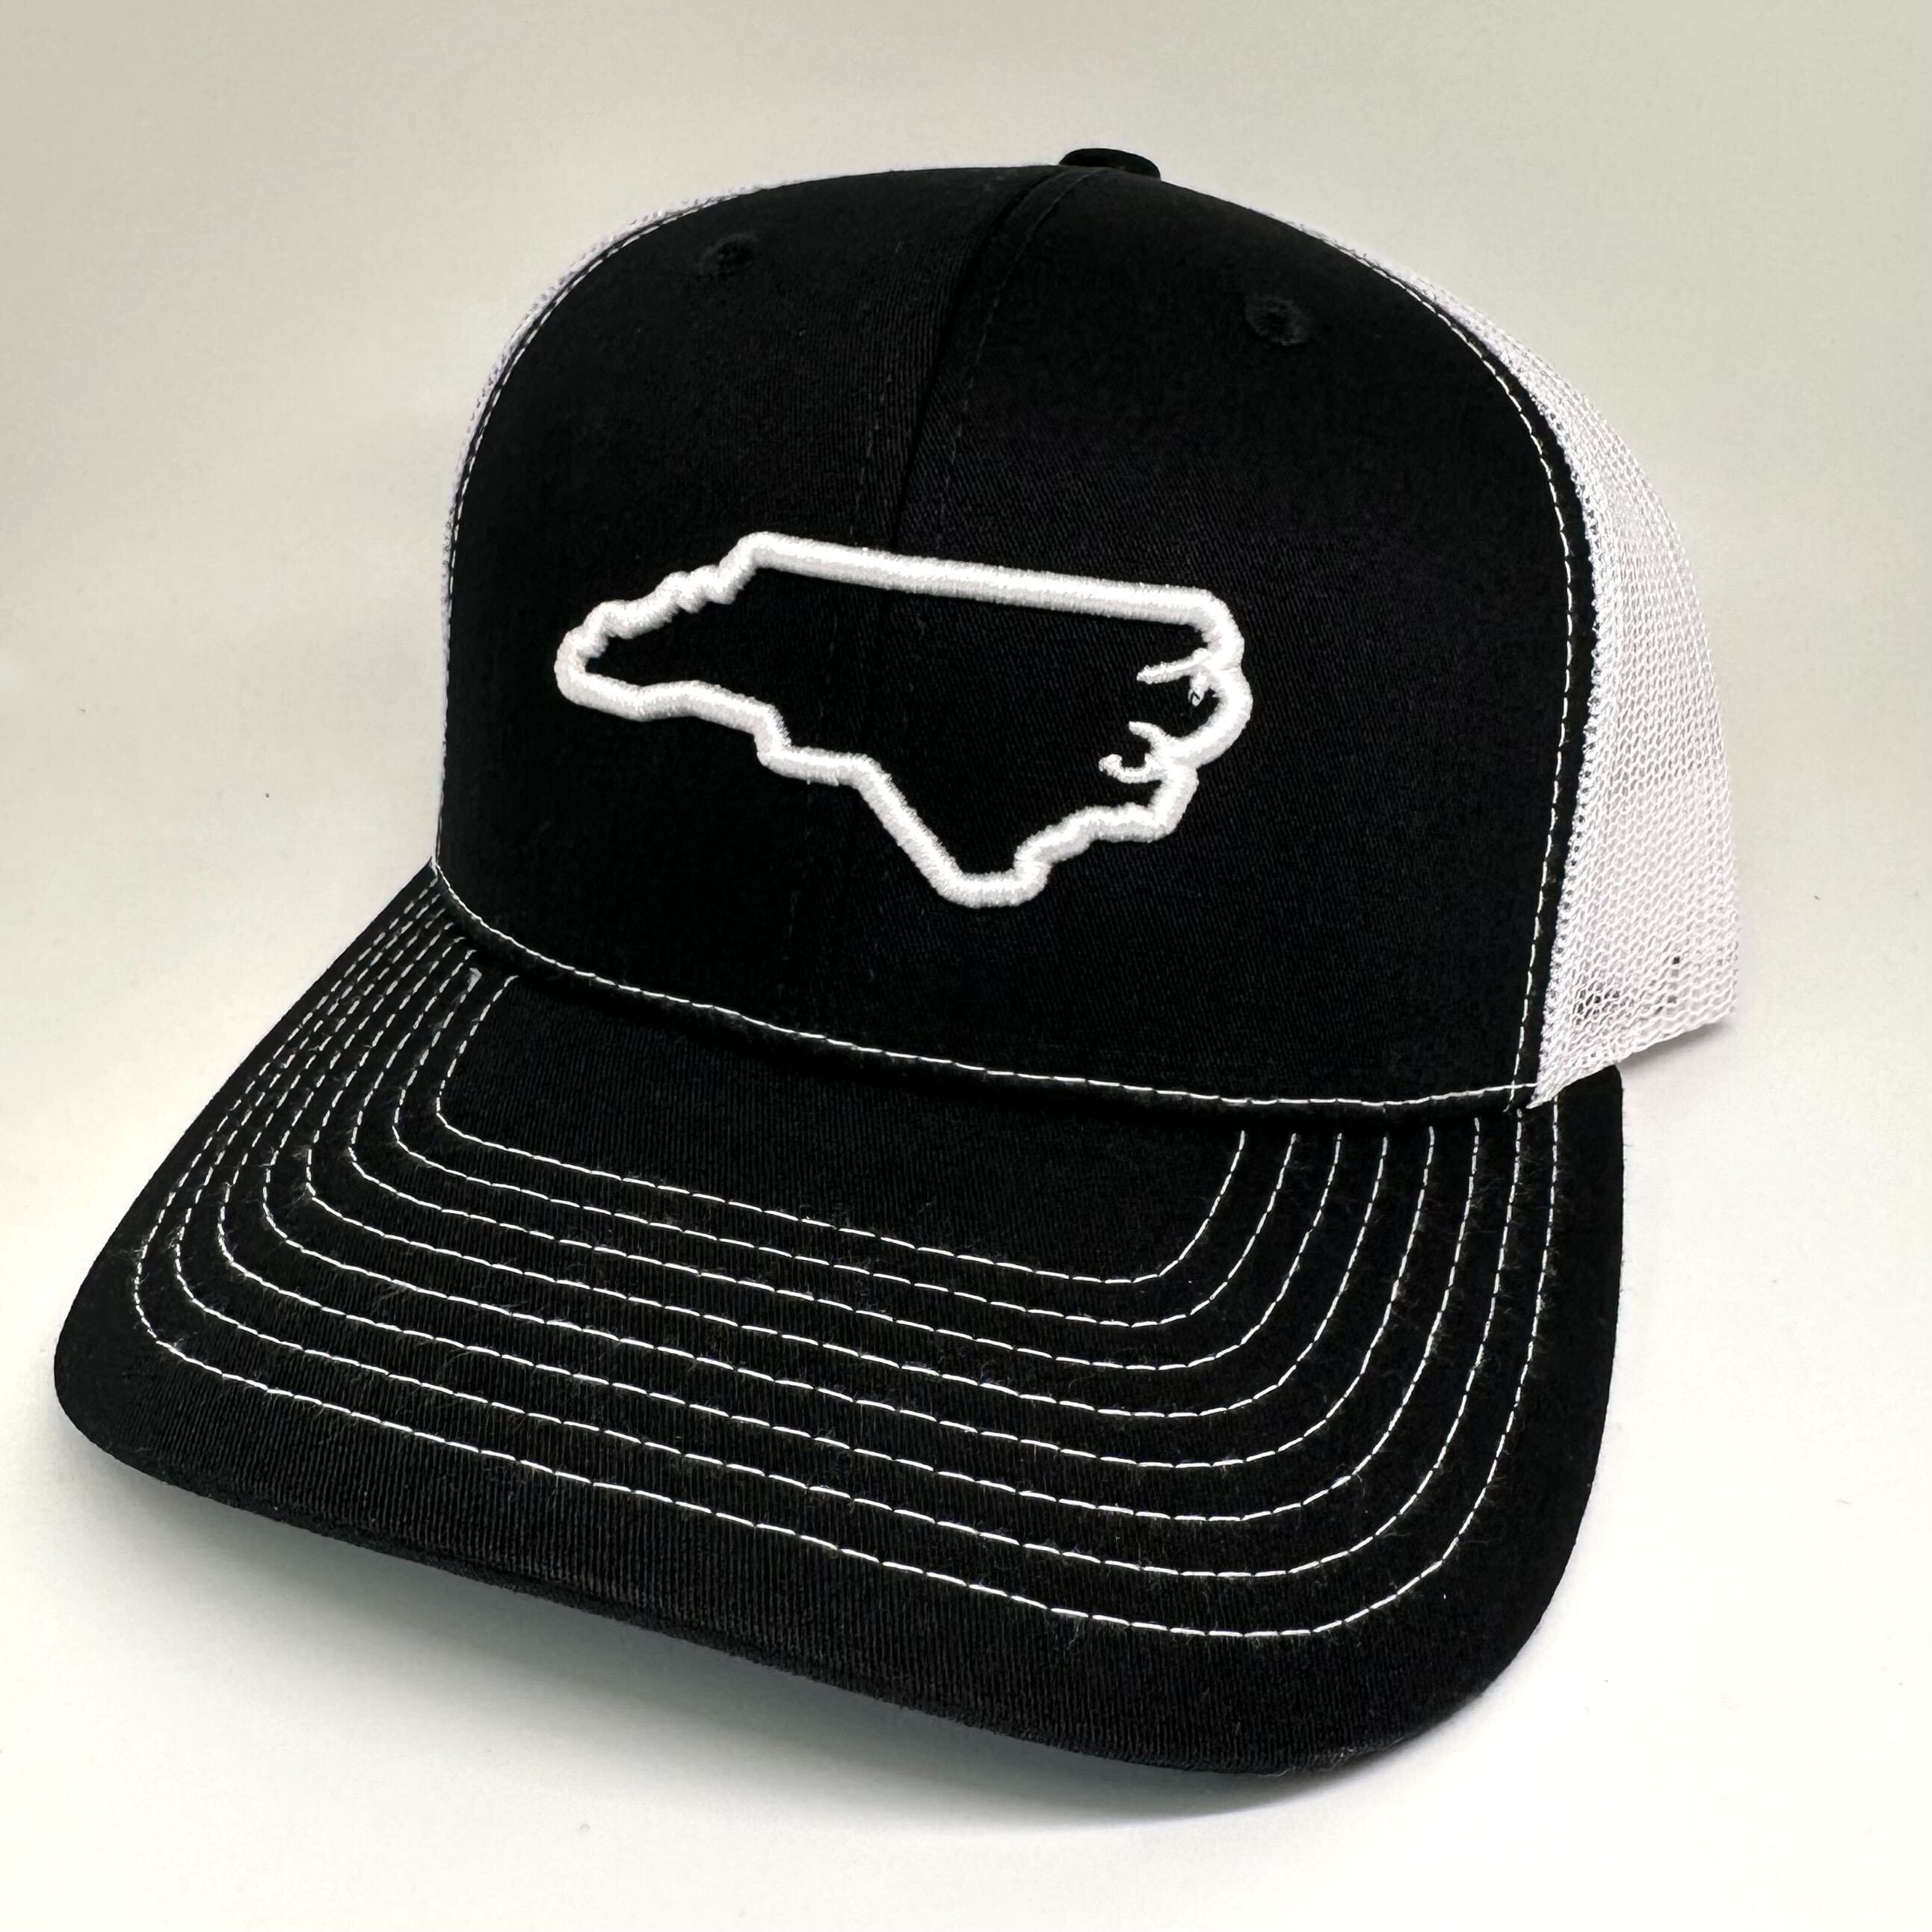 Thumbnail for North Carolina Embroidery Hat - Greater Half